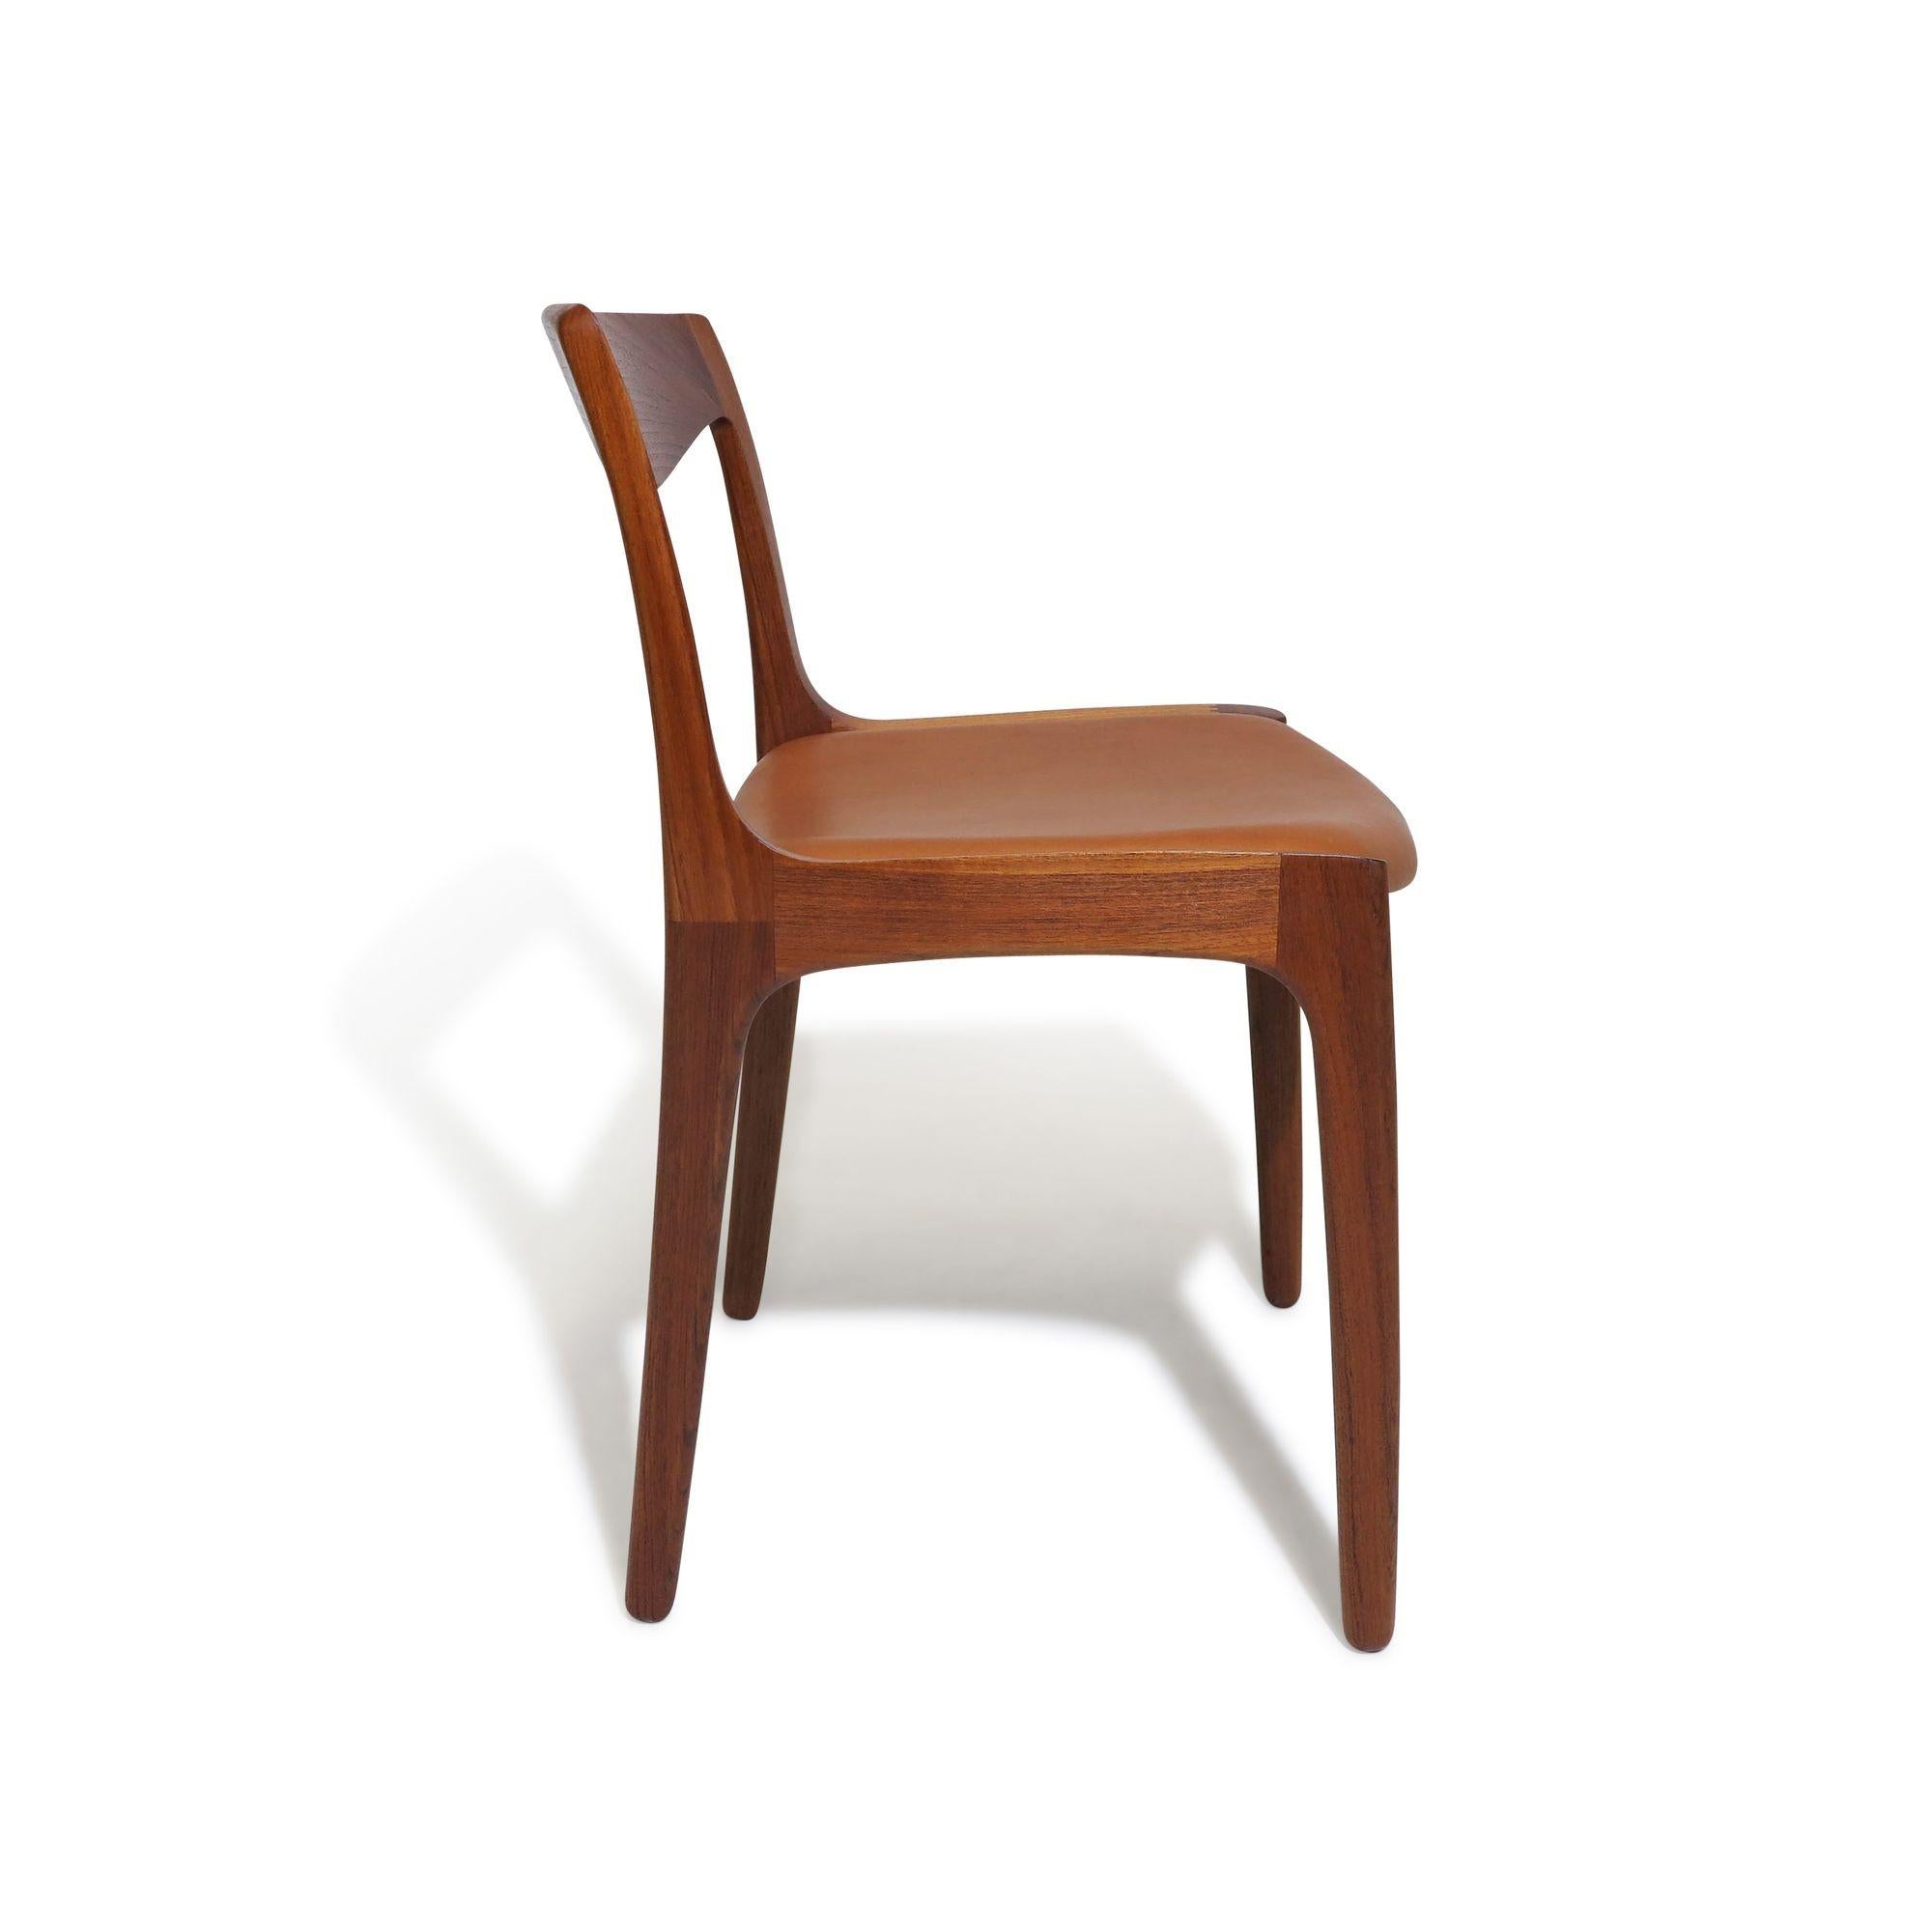 Vilhelm Wohlert for Poul Jeppesen's Teak Dining Chairs In Excellent Condition For Sale In Oakland, CA